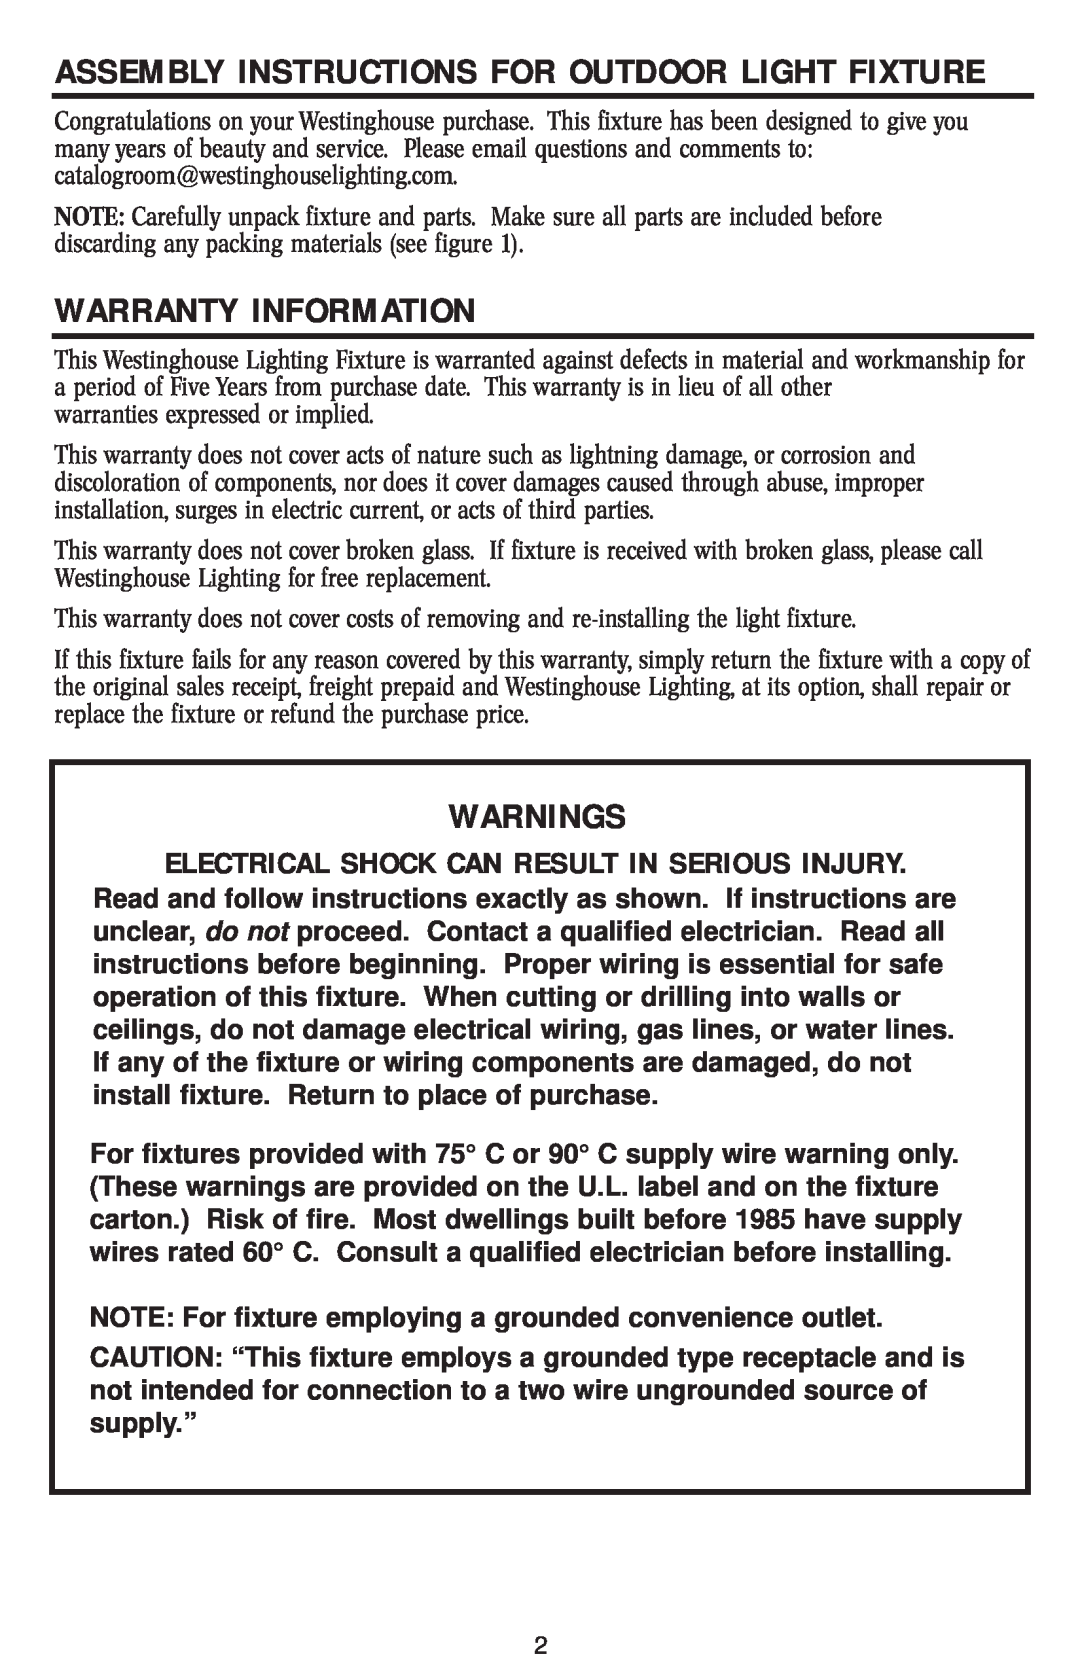 Westinghouse W-019 owner manual Warranty Information, Warnings, Assembly Instructions For Outdoor Light Fixture 